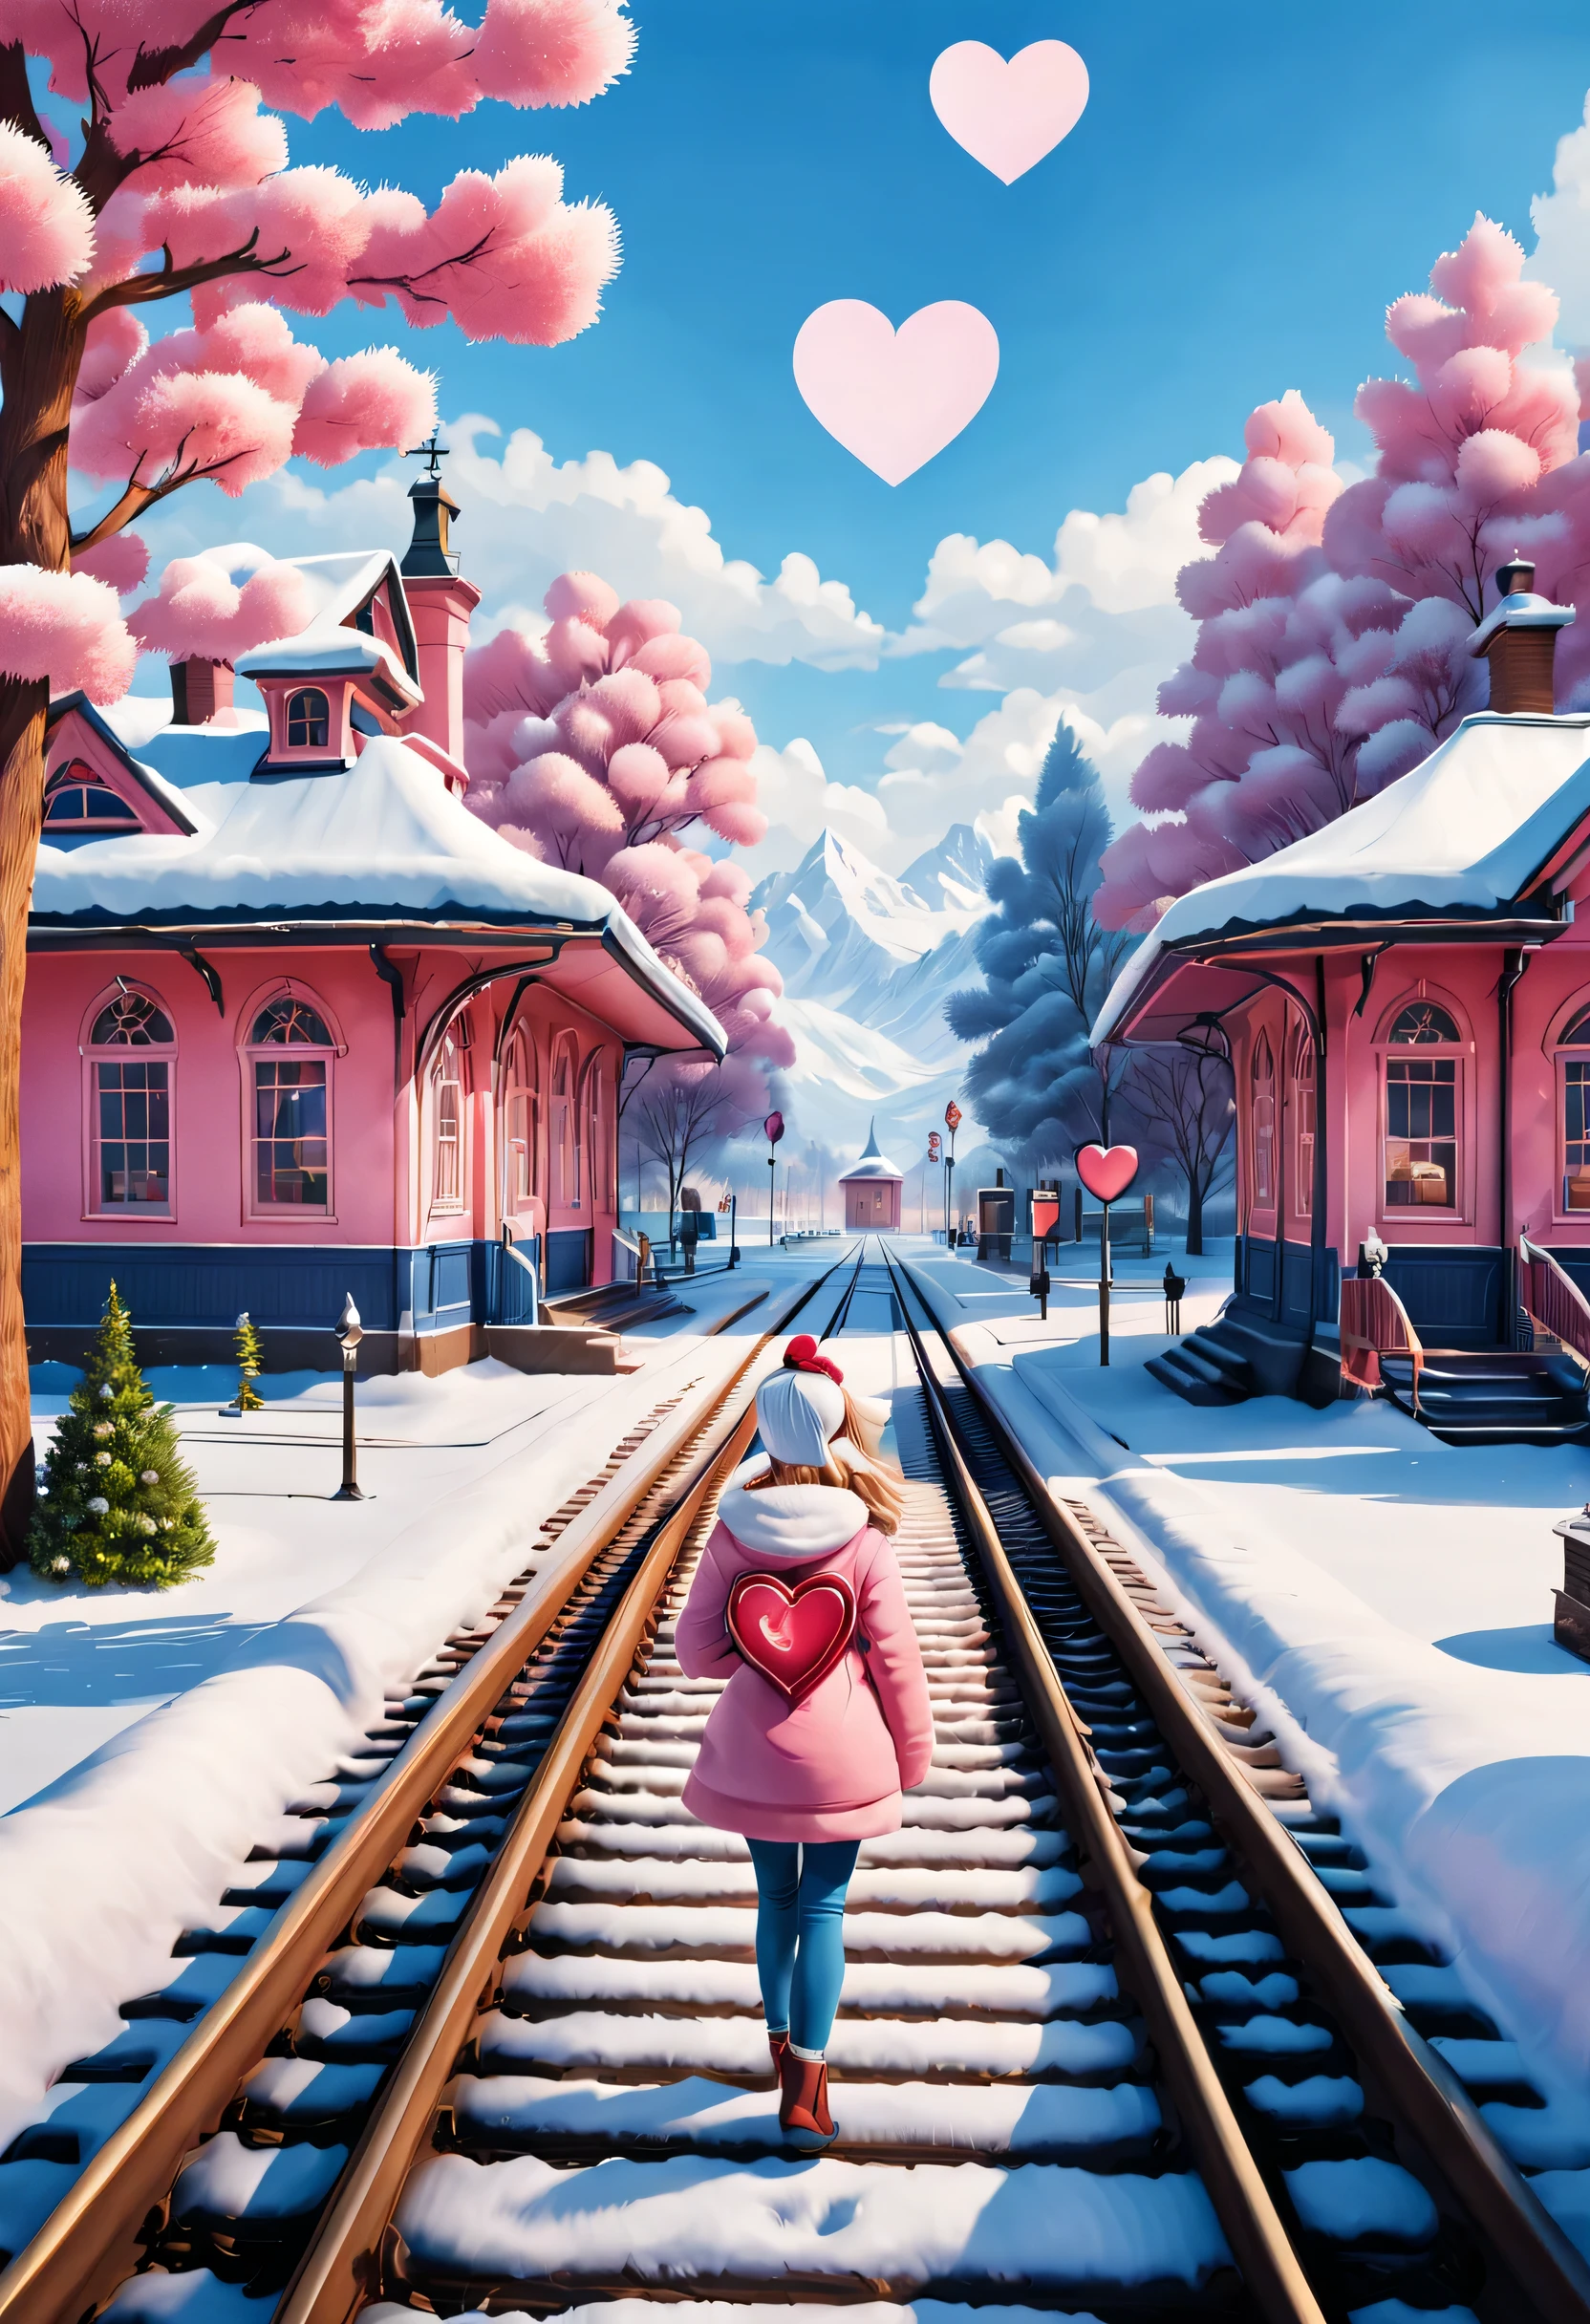 Fauvist style,, Beautiful and meticulous，beautiful train station，With snow scene and train tracks (There is a small warm pink station on the roadside), There&#39;s a giant heart-shaped station sign and a heart-shaped love tree. There are warm little station buildings on both sides of the stop sign., There is thick snow. There is a super wide-angle lens on the front, 8k, Ultra-clear, actual, Romantic, And look forward to the back view of the cartoon  in blue clothes, Create a heavenly atmosphere,